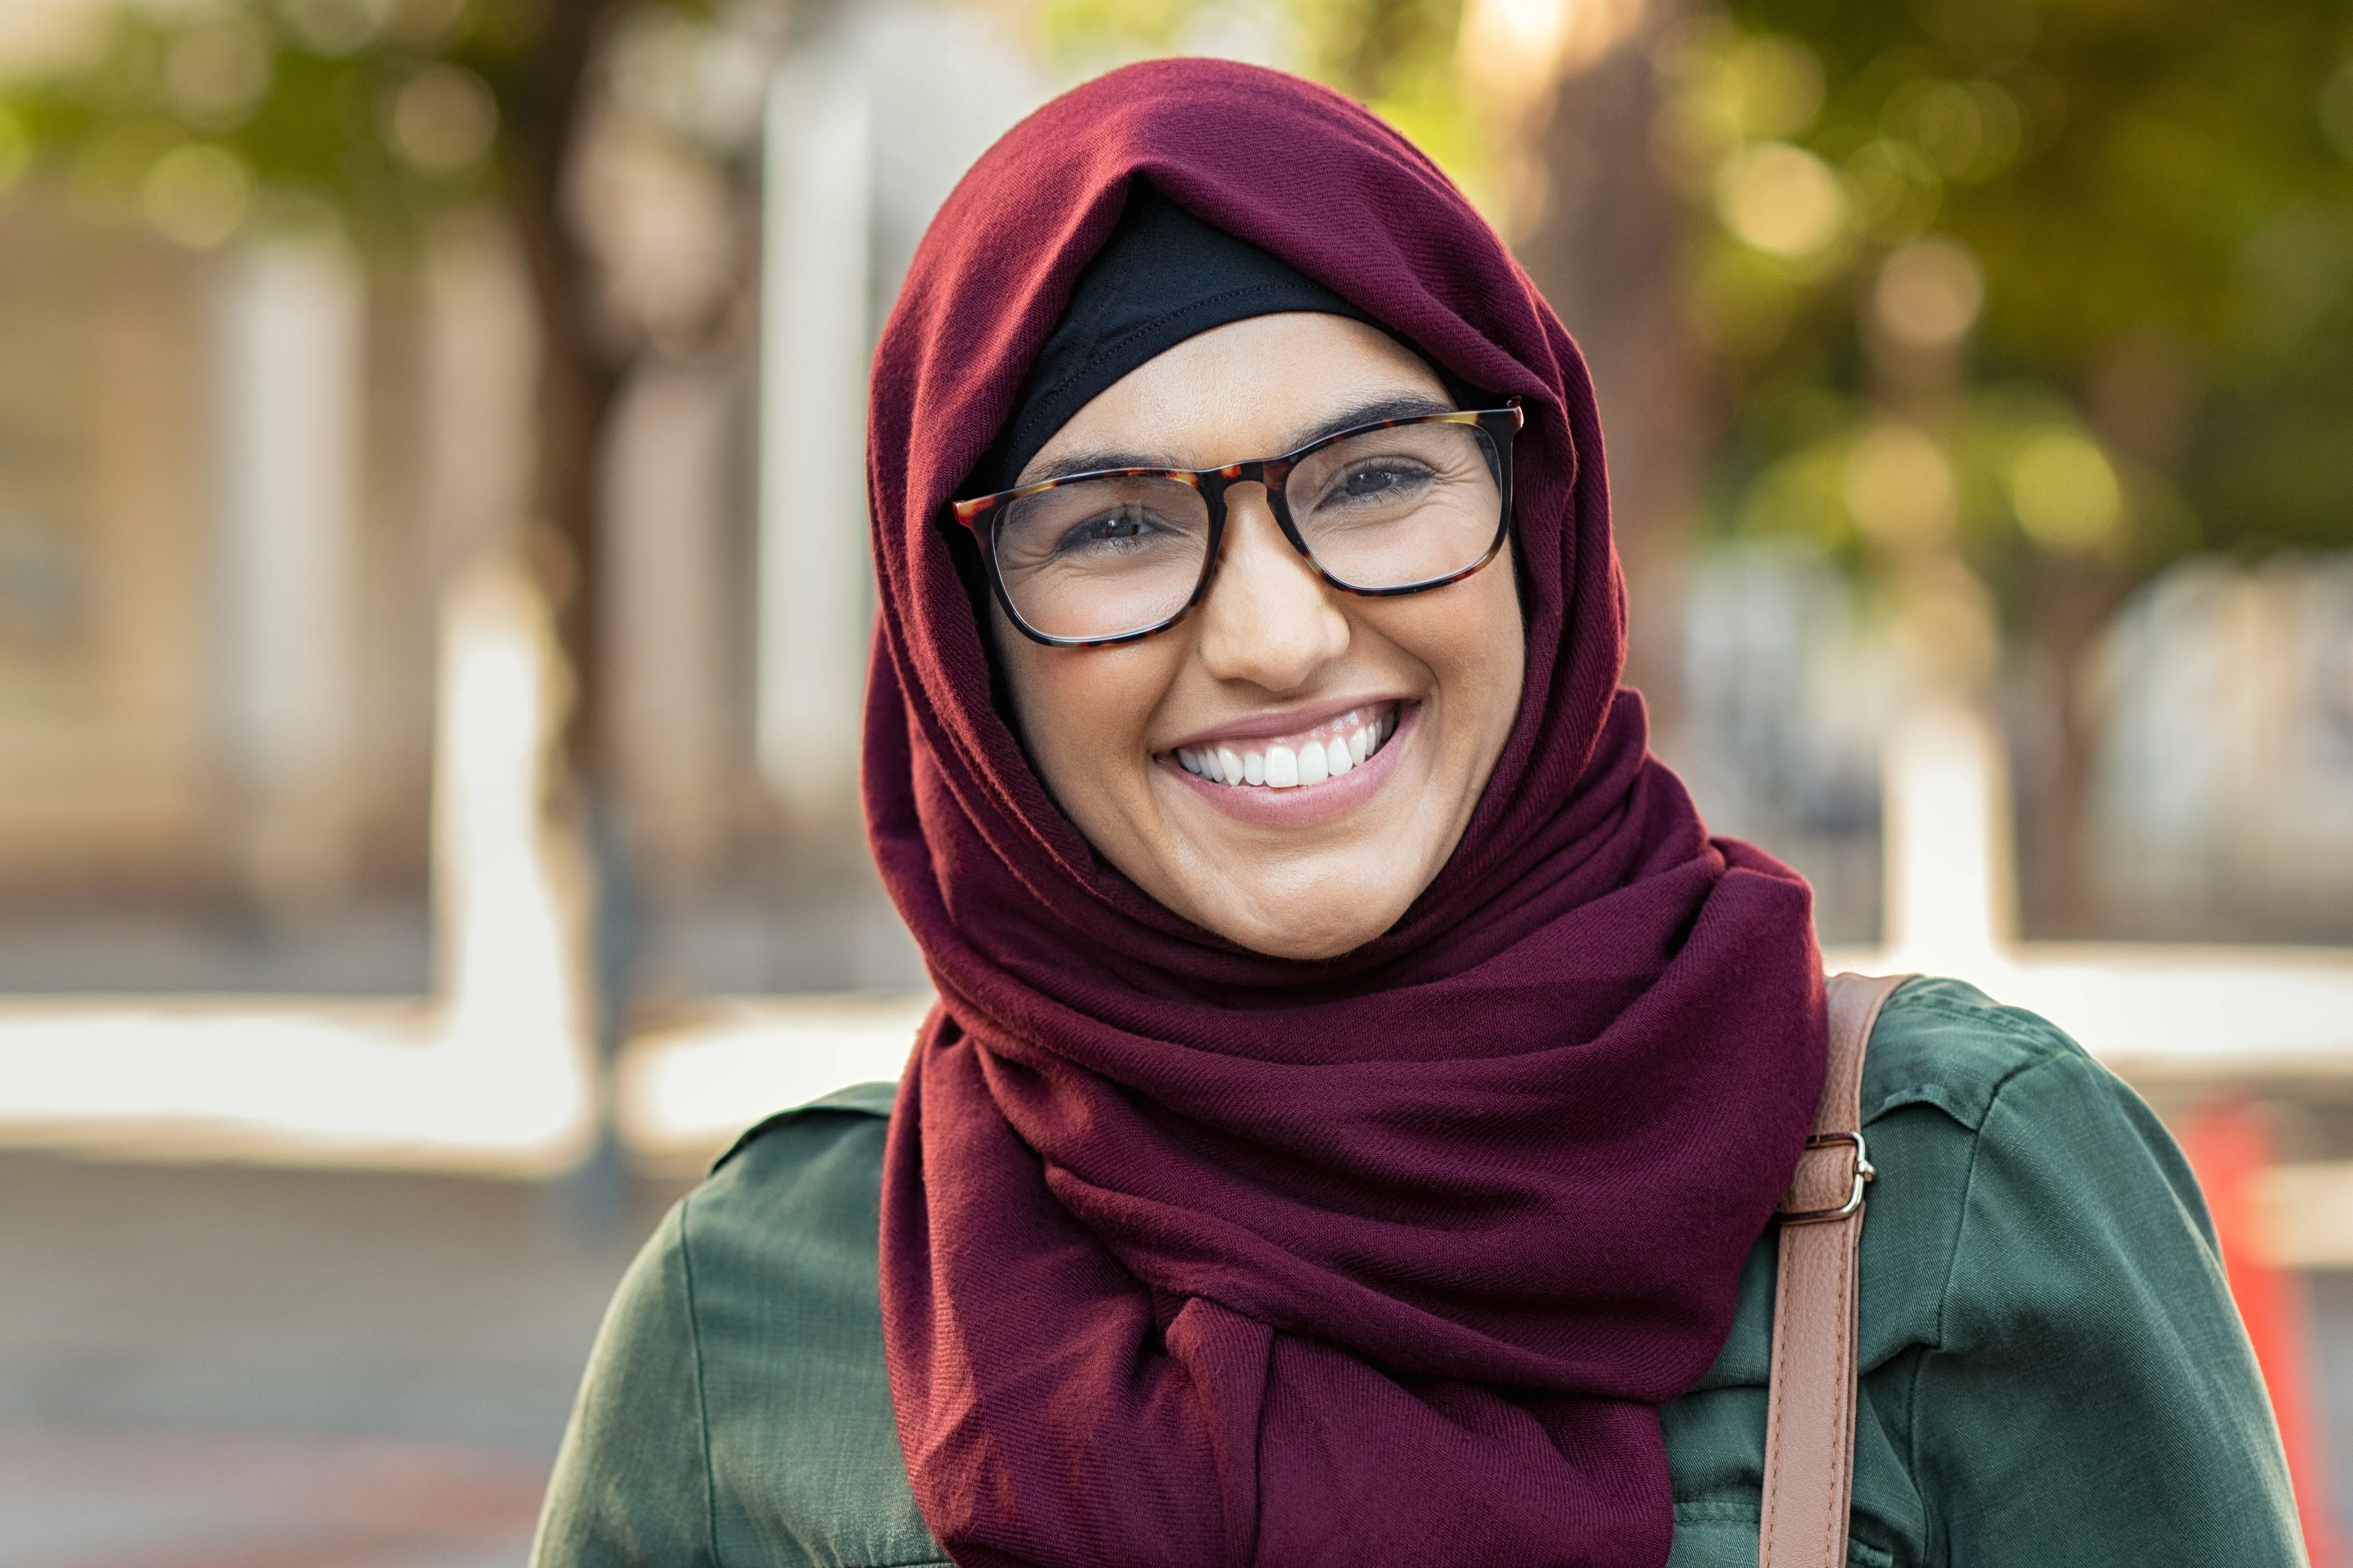 Smiling young woman with glasses in hijab